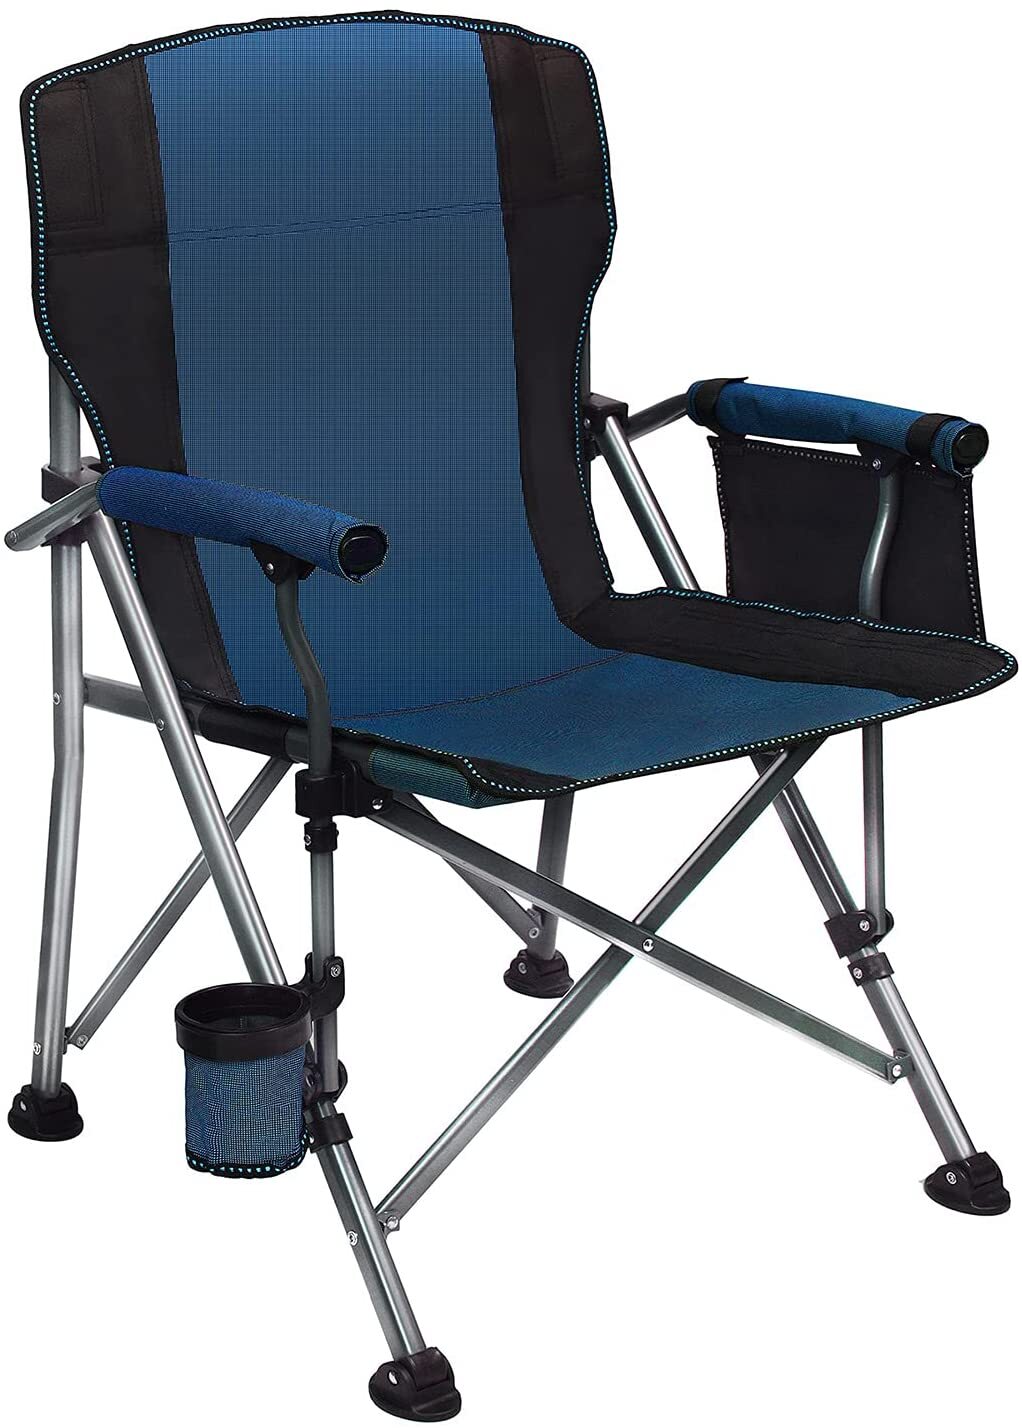 https://images.51microshop.com/5848/product/20220121/copy_of_Folding_Camping_Chair_Oversized_Collapsible_Camp_Chair_with_Cup_Holder_and_Removable_Storage_Bag_Heavy_Duty_Support_350_LBS_Portable_Lawn_Chair_for_Outdoor_Camp_Picnic_Travel_Fishing_1642752504269_2.jpg